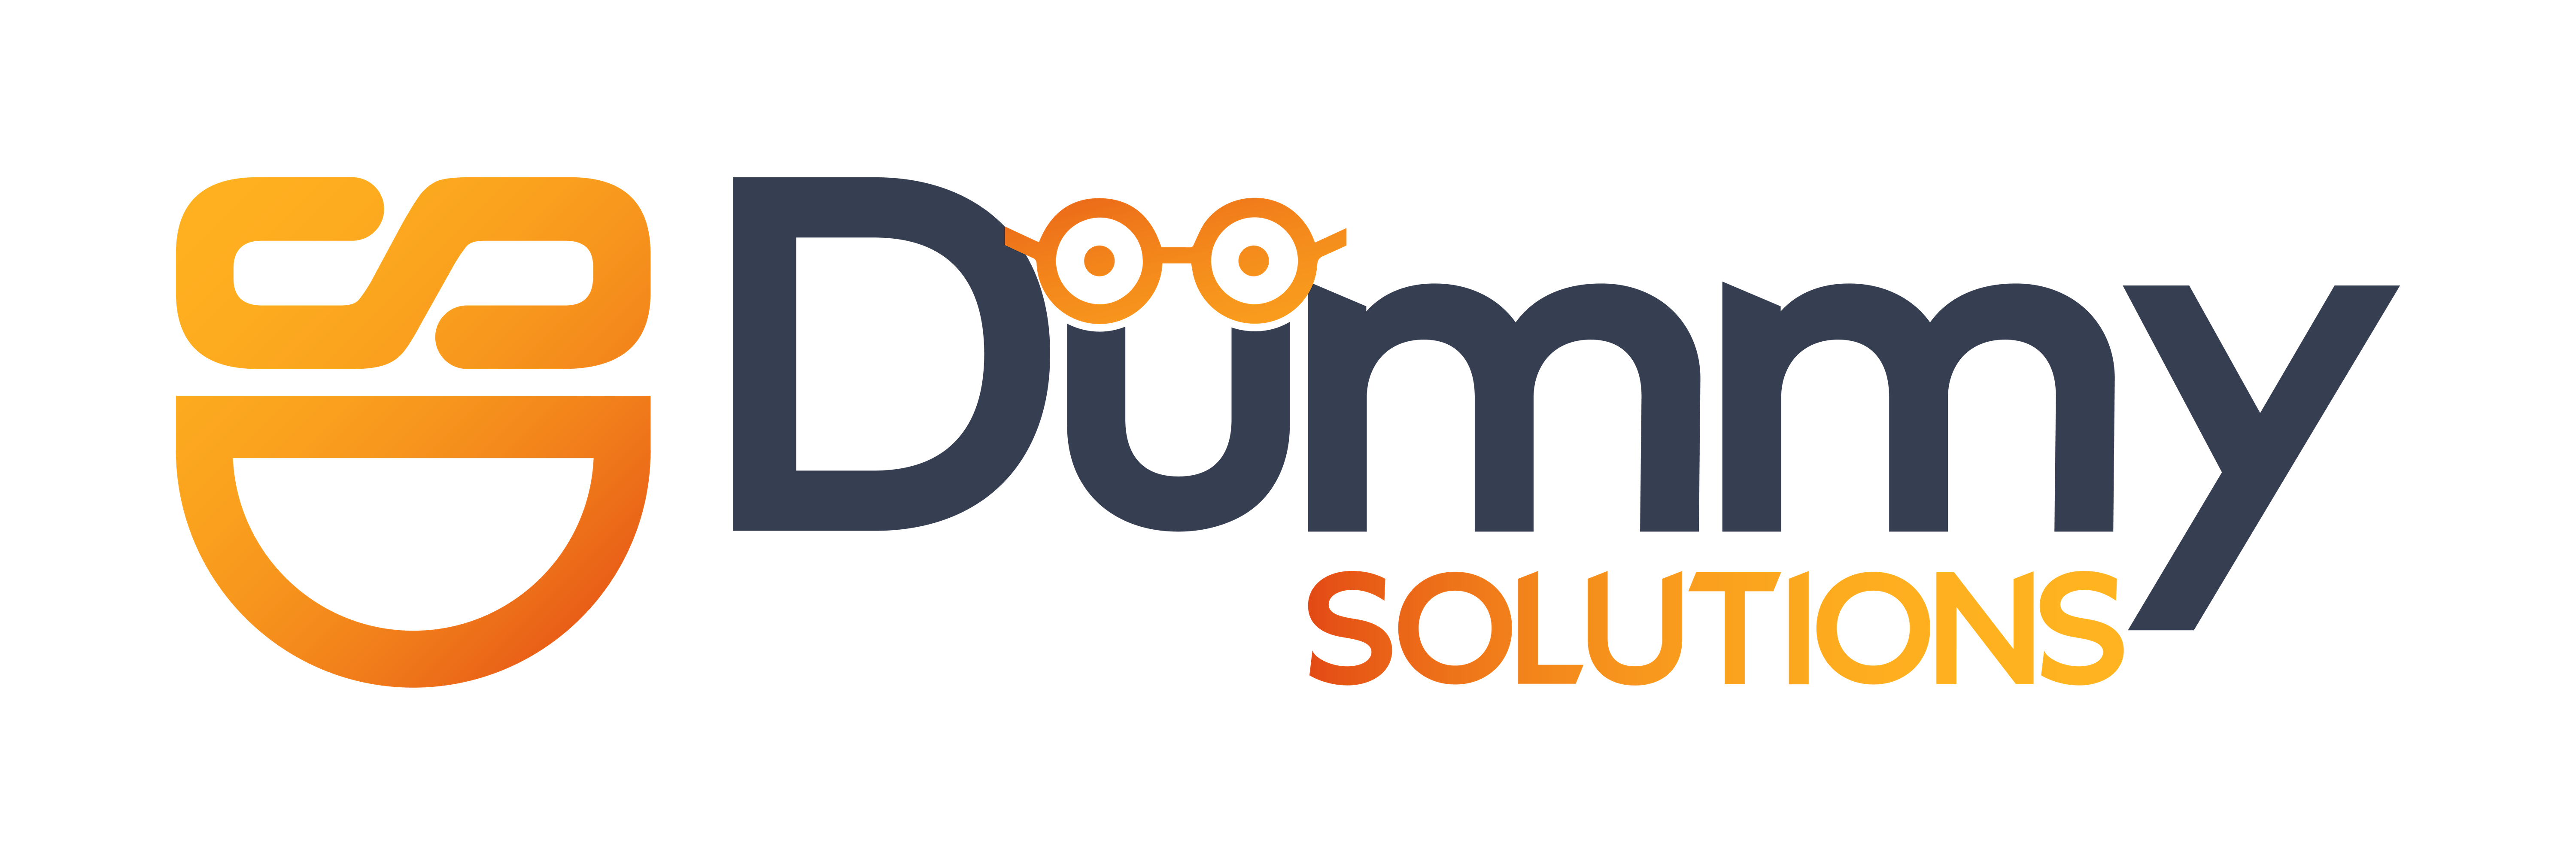 Dummy Solutions Website Hosting and Domain Names